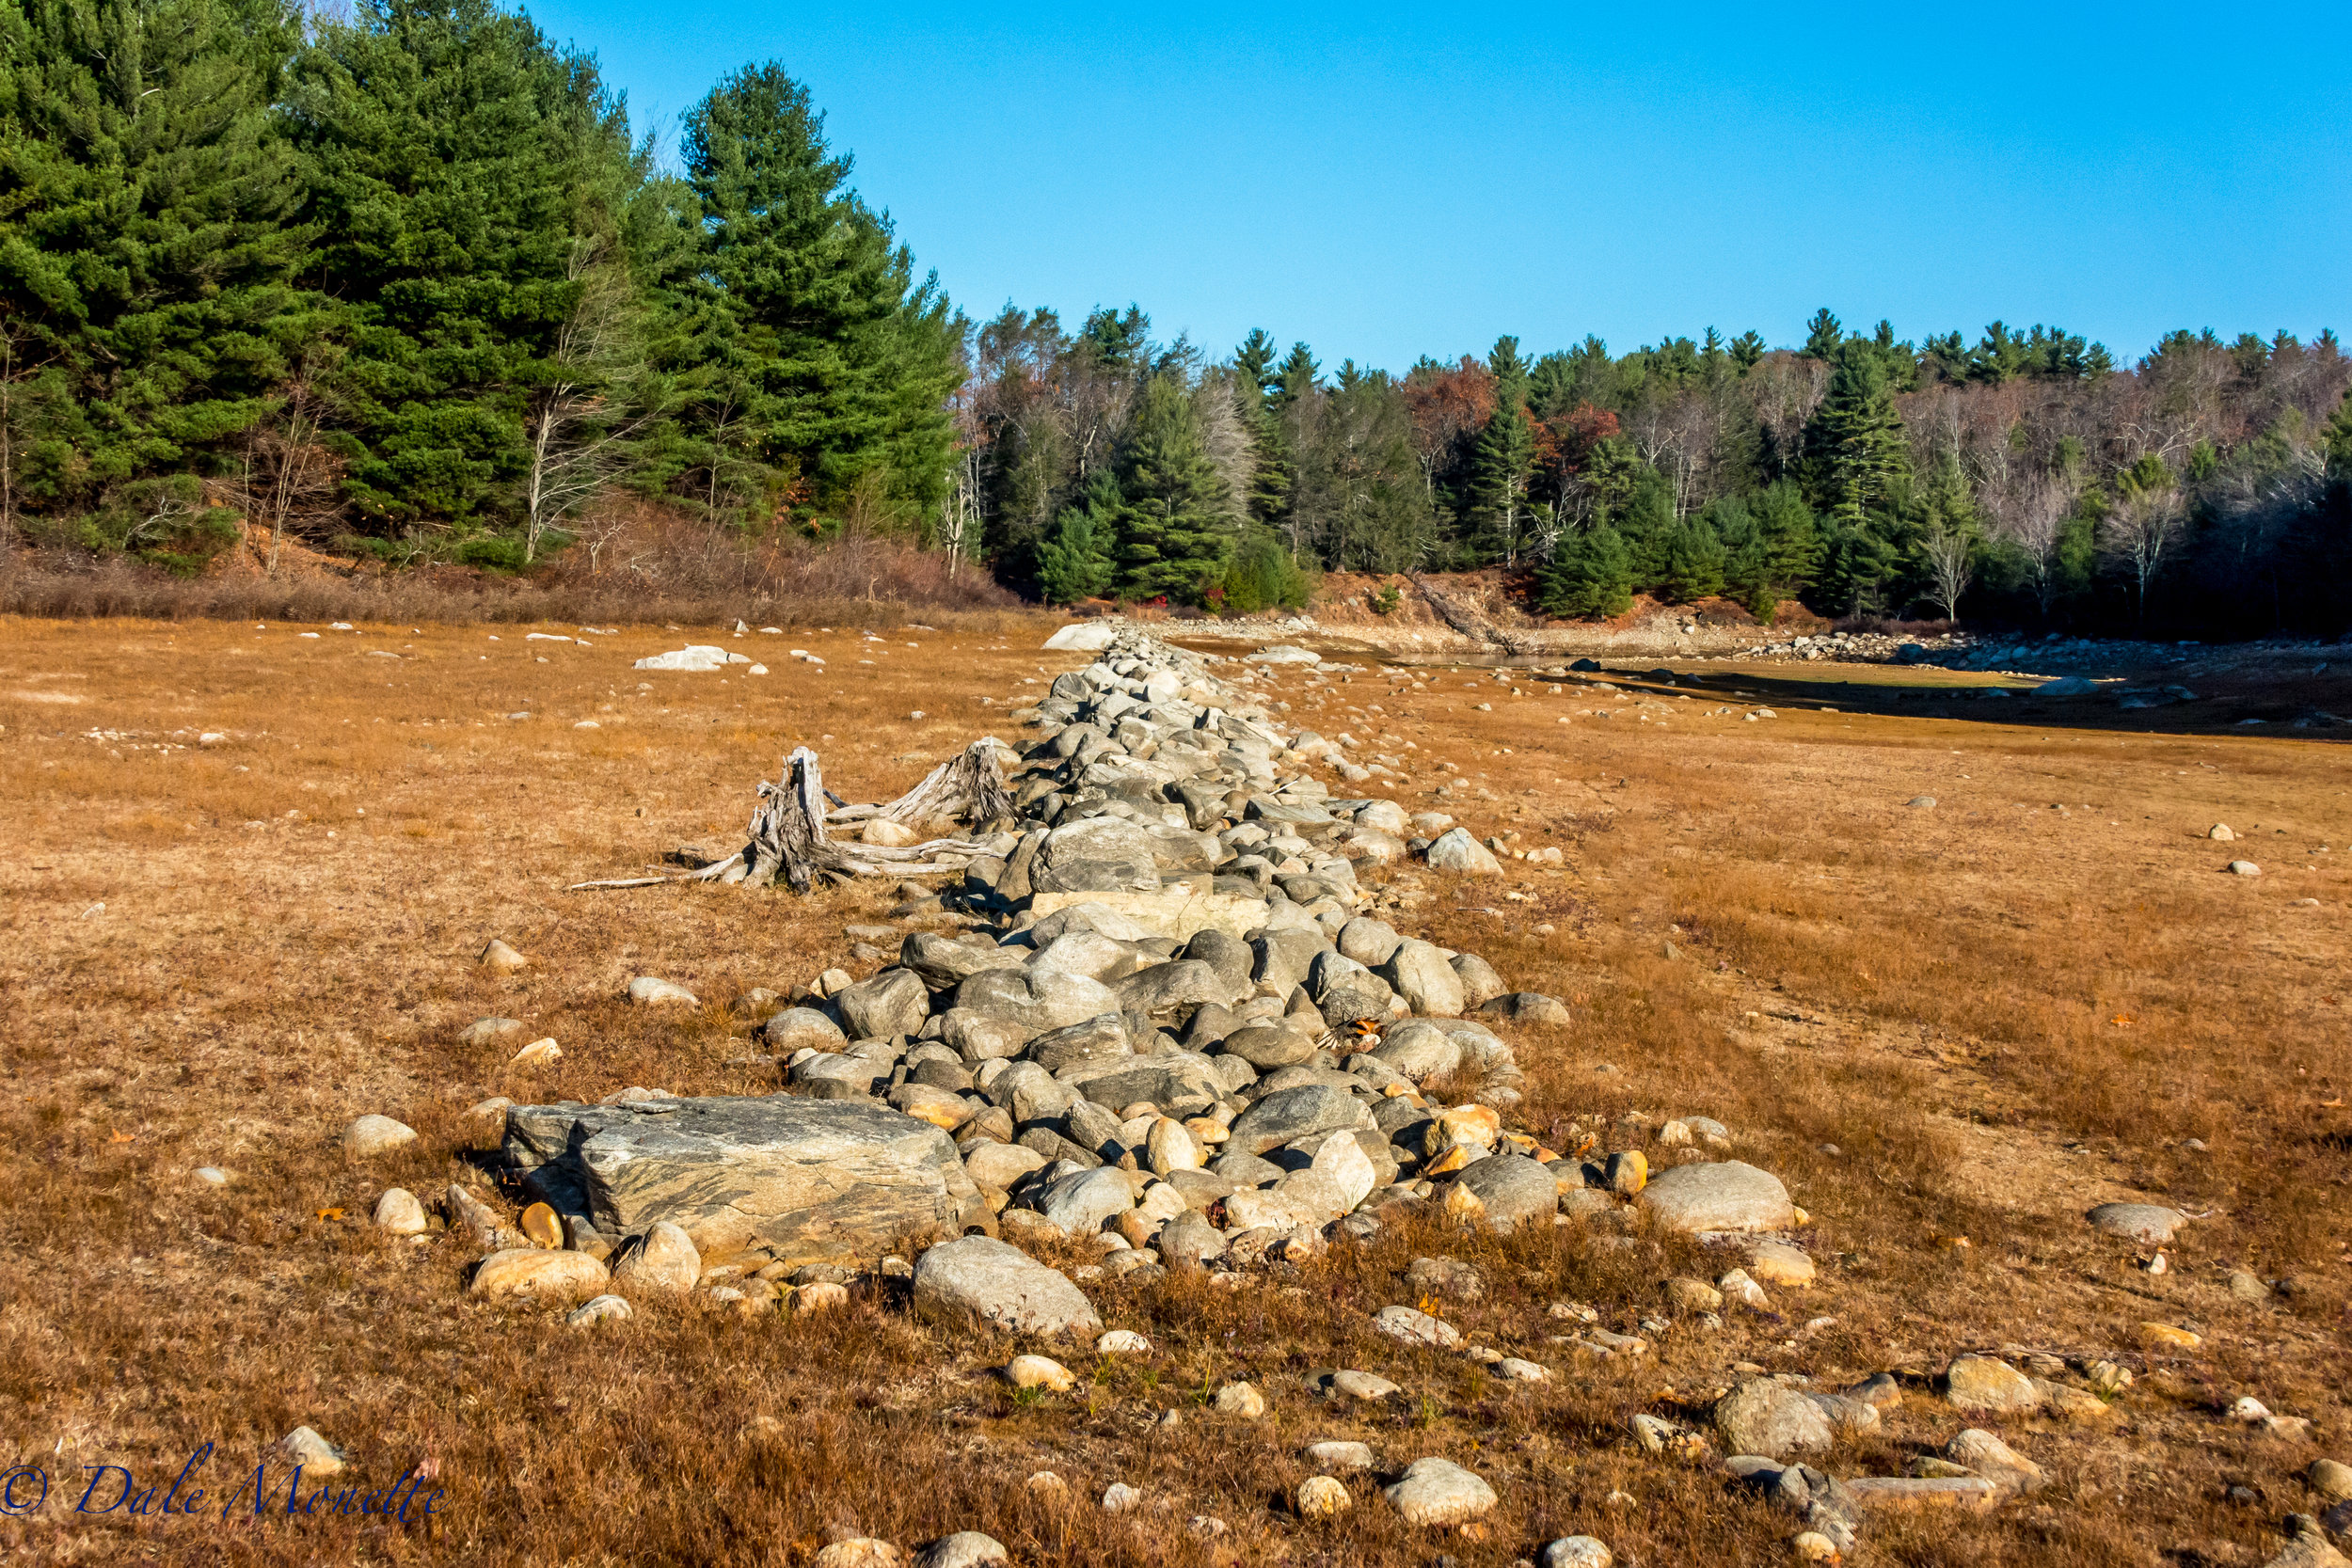   A look at how low the water is in the Quabbin Reservoir. This is where the mouth of the east branch of the Fever Brook dumps into the Reservoir way back in the distance. Notice the old stonewall now out of water. &nbsp;11/18/16   